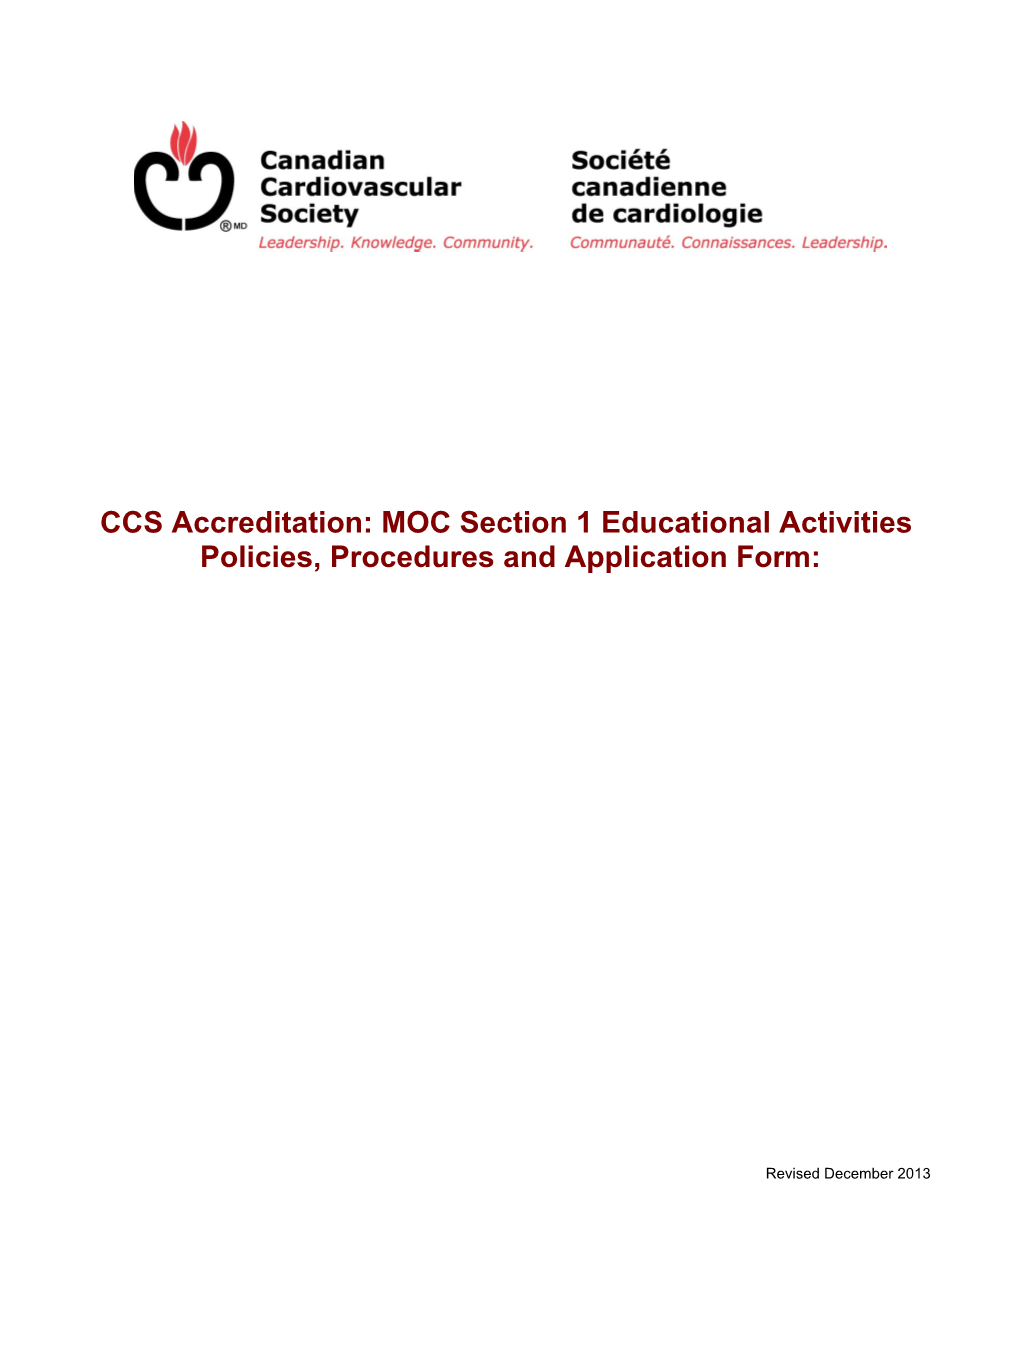 CCS Accreditation Policies and Procedures and Application Form